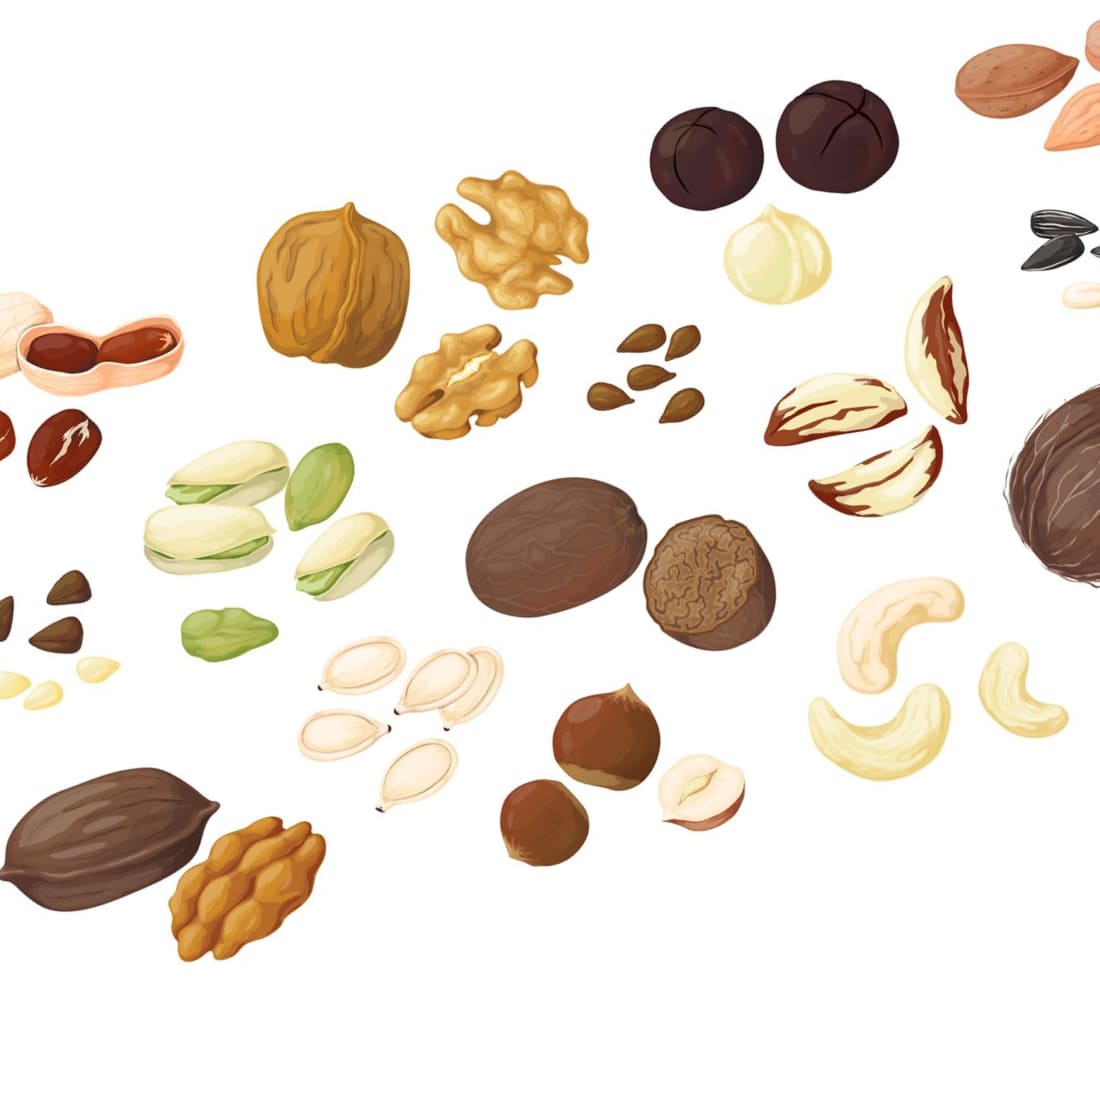 Almonds, walnuts, coconut and other nuts are drawn as a cartoon.